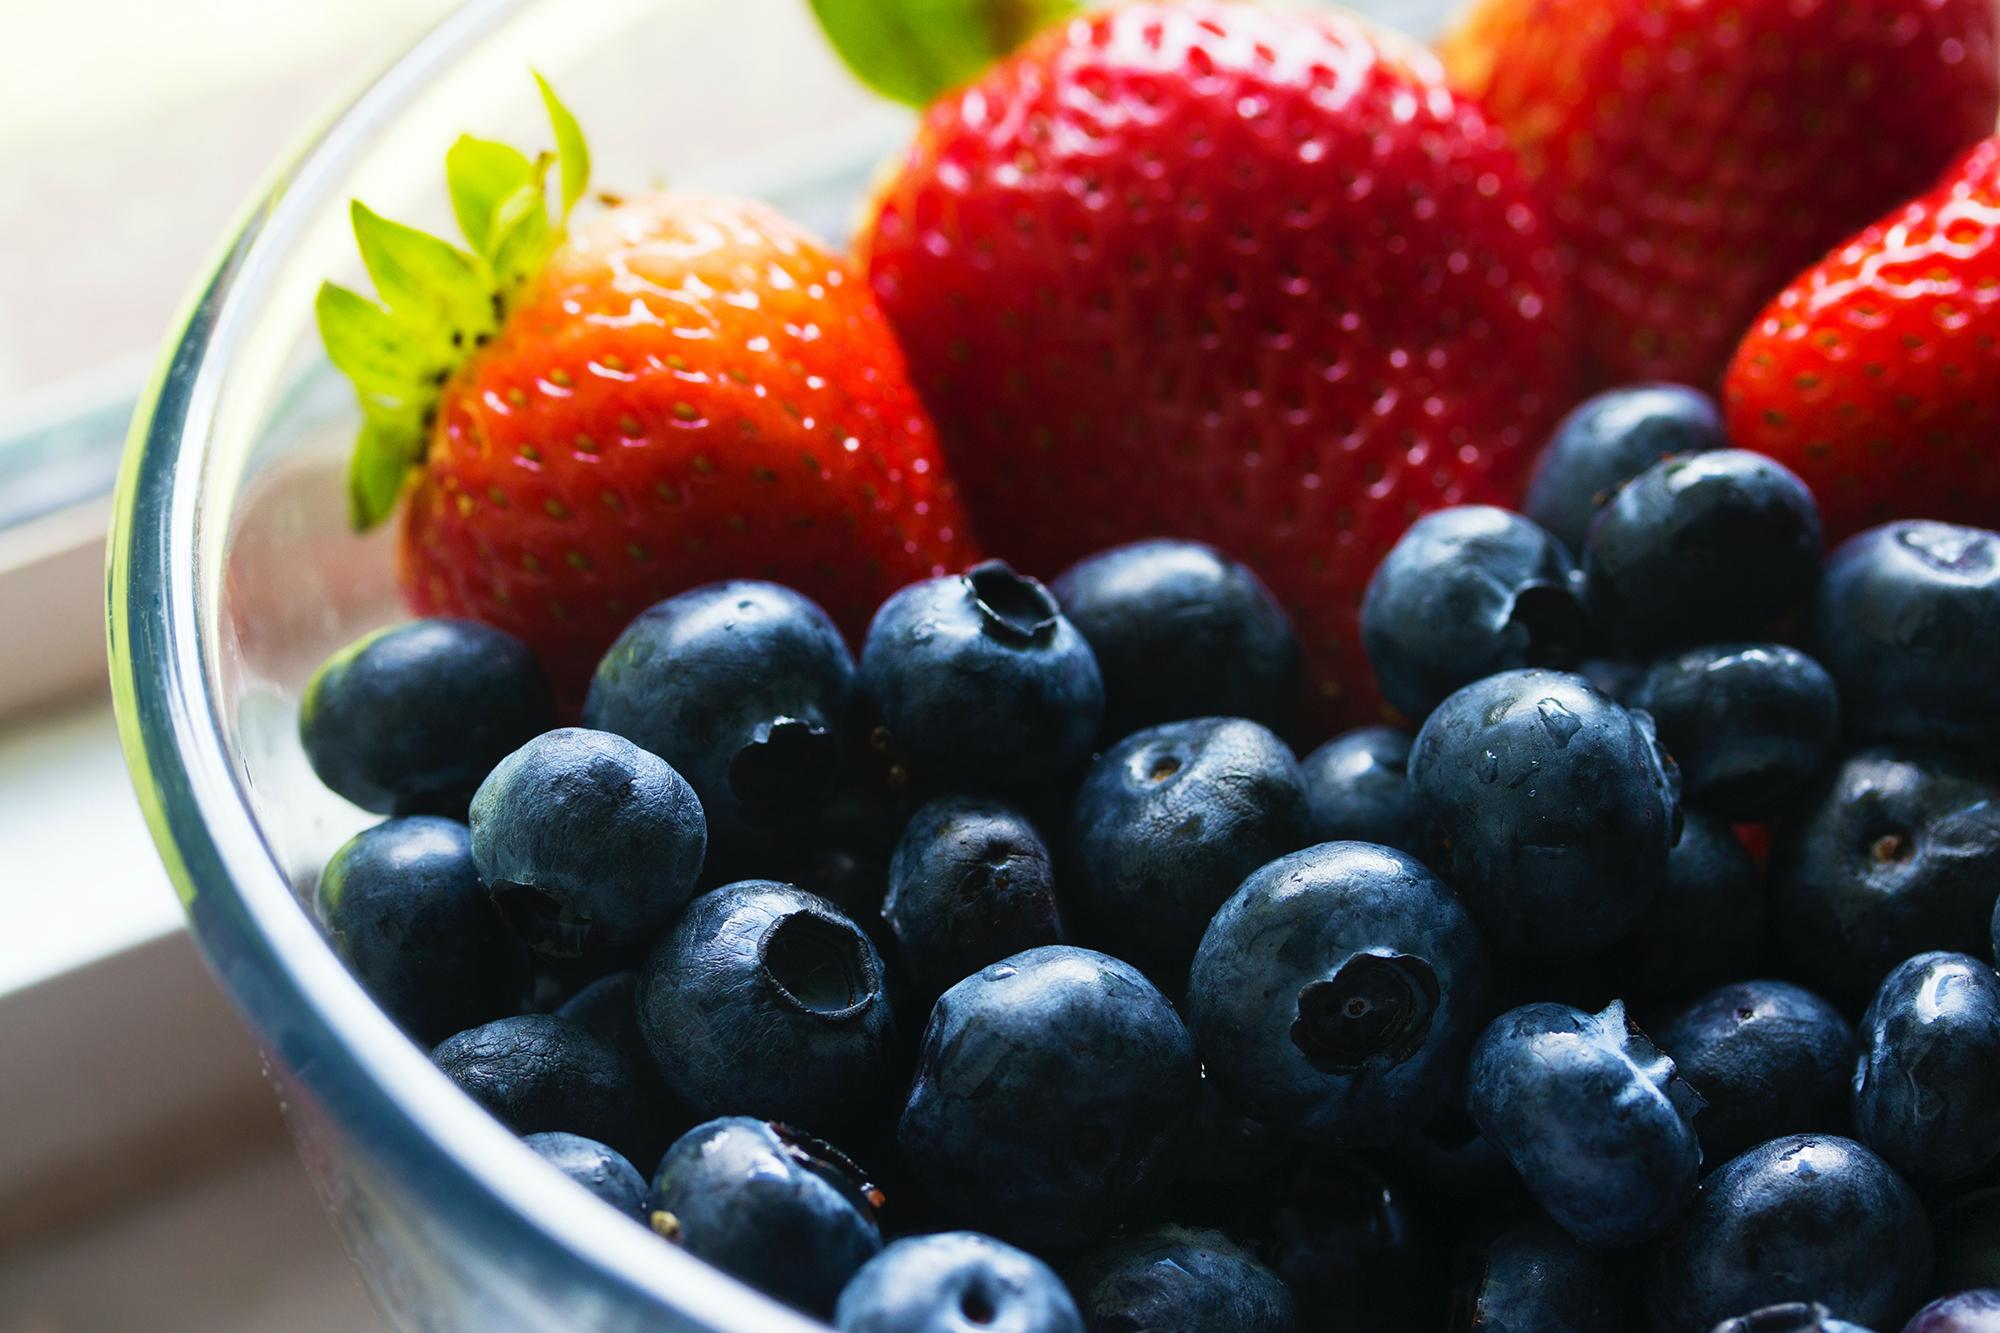 A bowl of fruit containing strawberries and blueberries